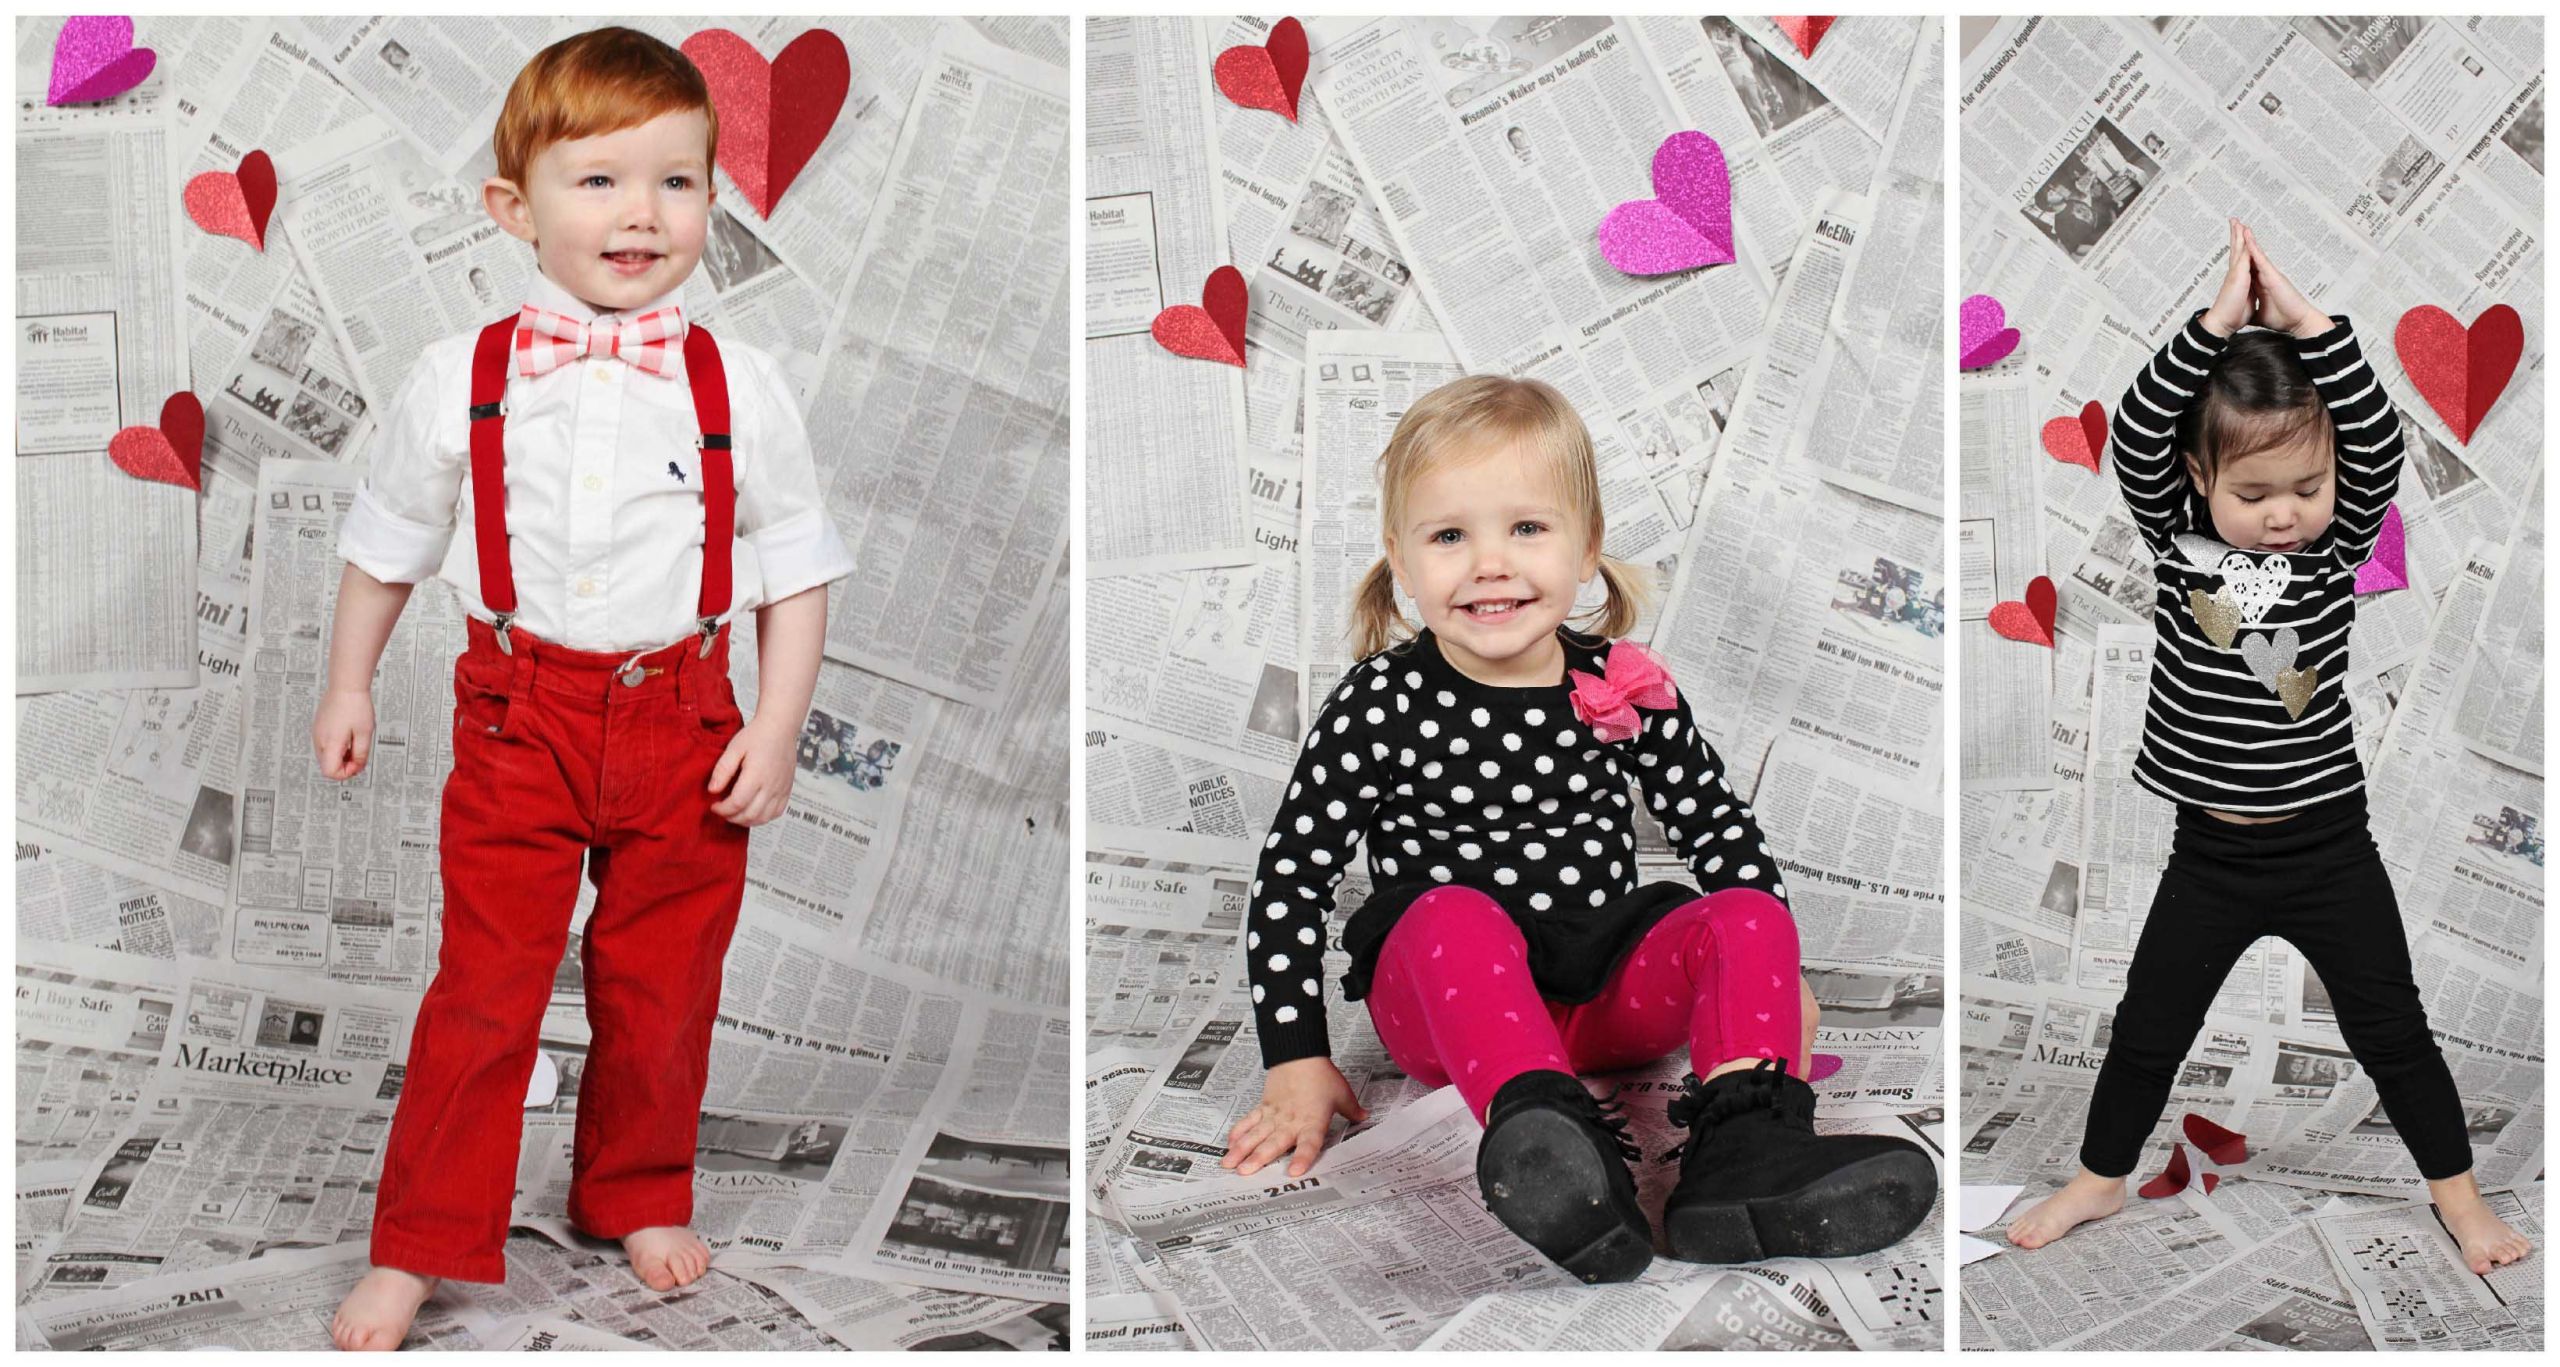 Valentines Day Photography Ideas
 Watch this Valentine s Day Ideas